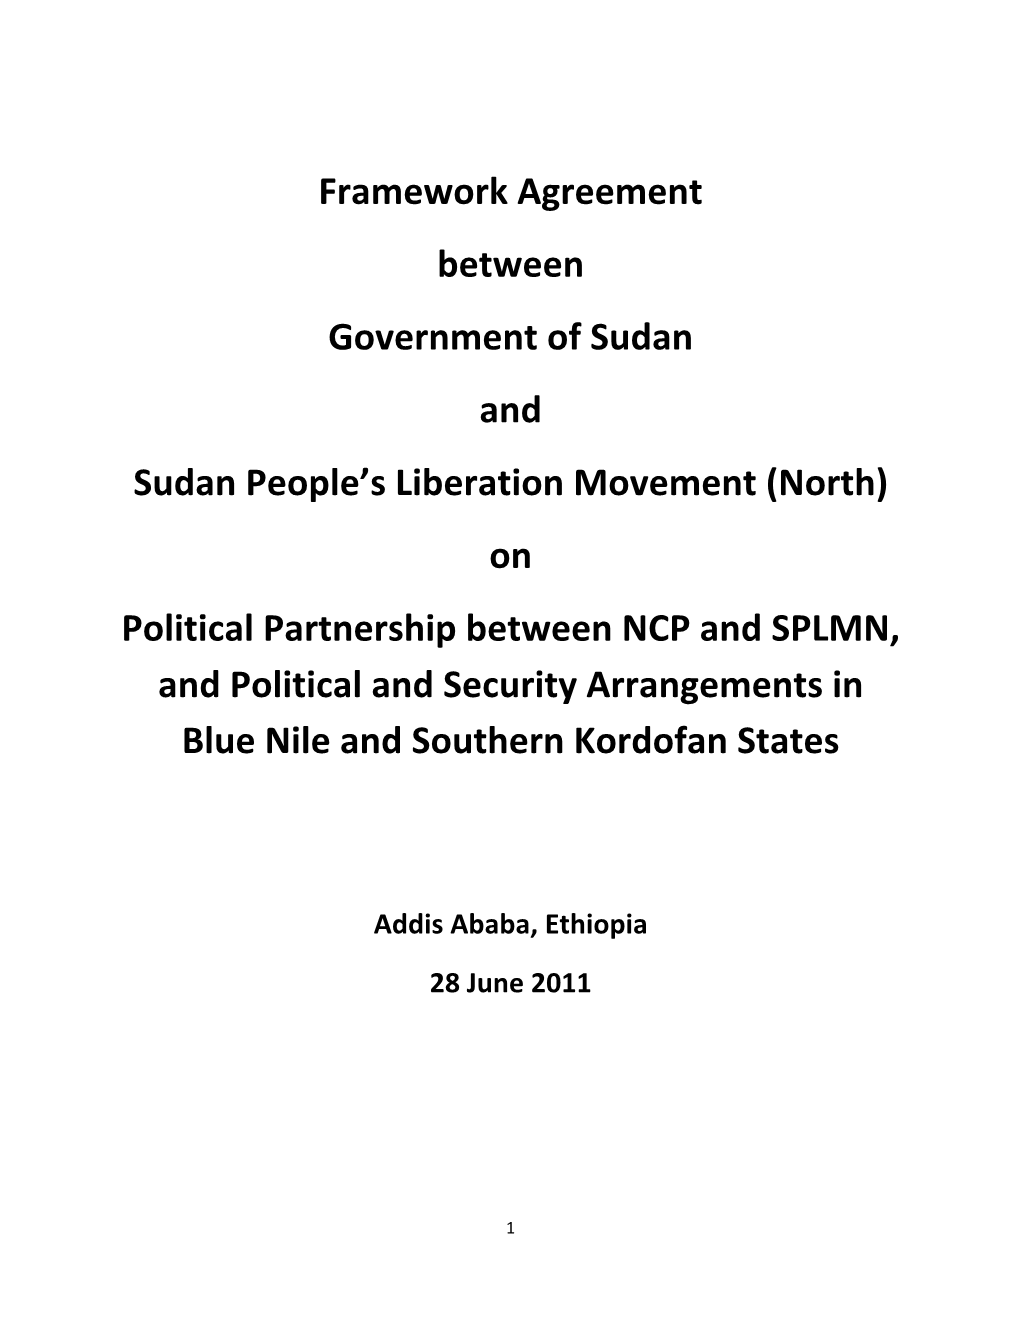 Framework Agreement Between Government of Sudan and Sudan